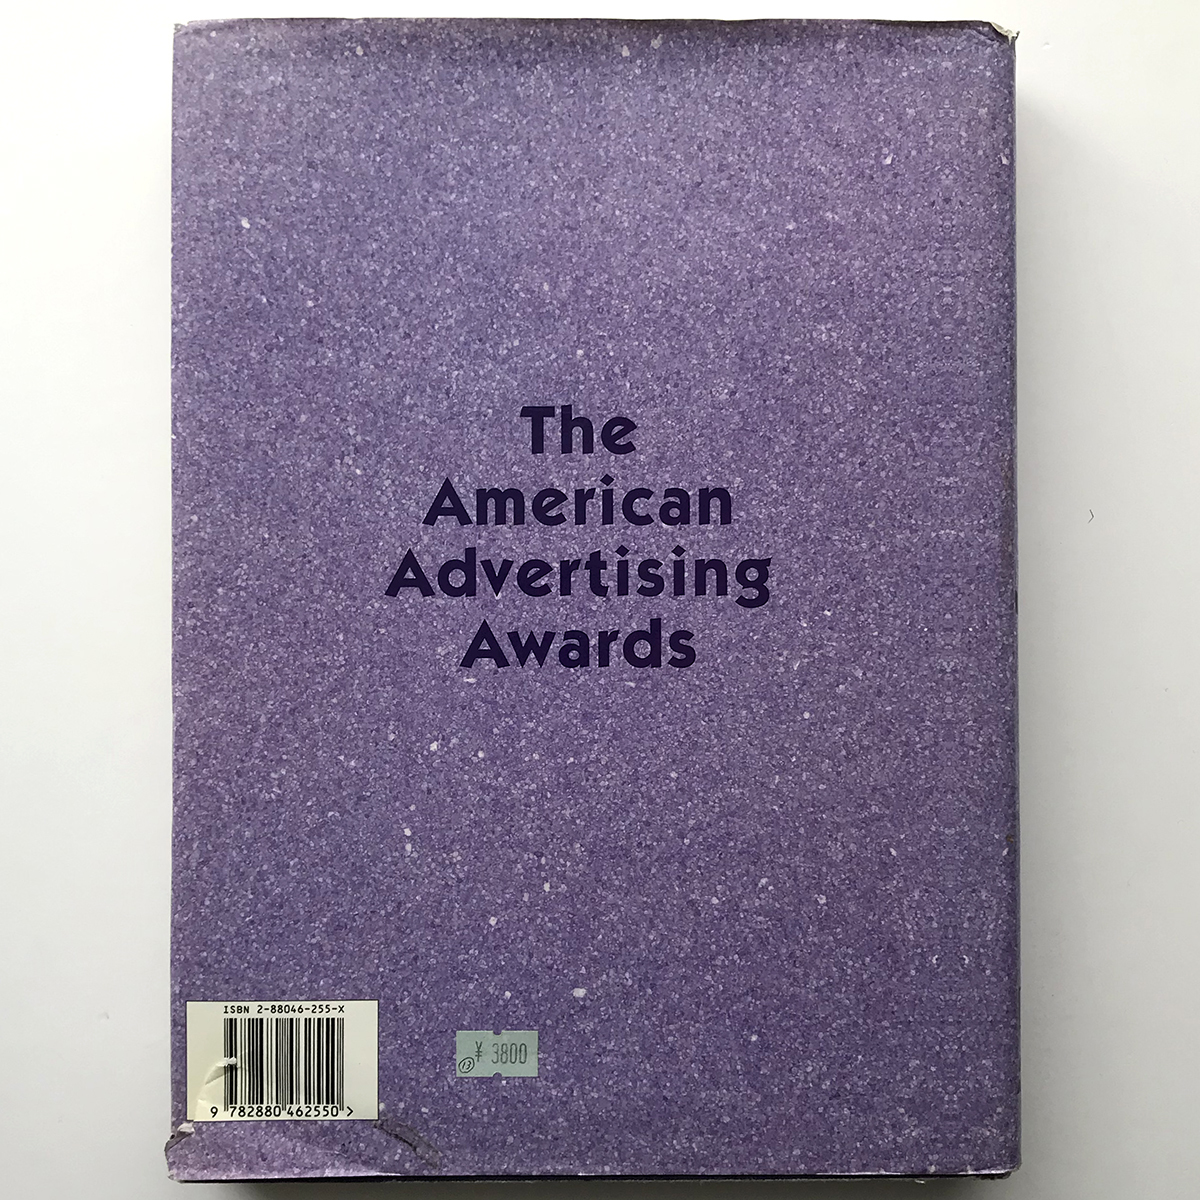 THE BOOK VOLUME 2 THE AMERICAN ADVERTISING AWARDS